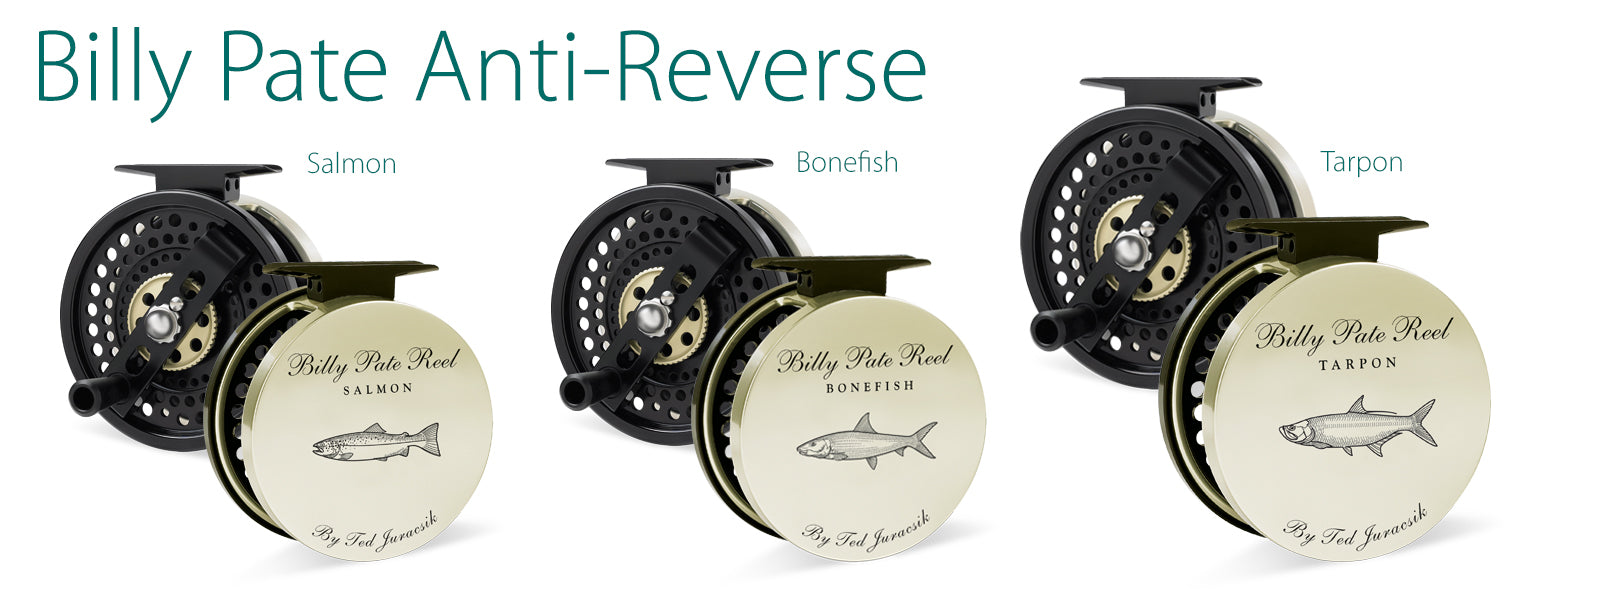 At Auction: Billy Pate Trout Reel